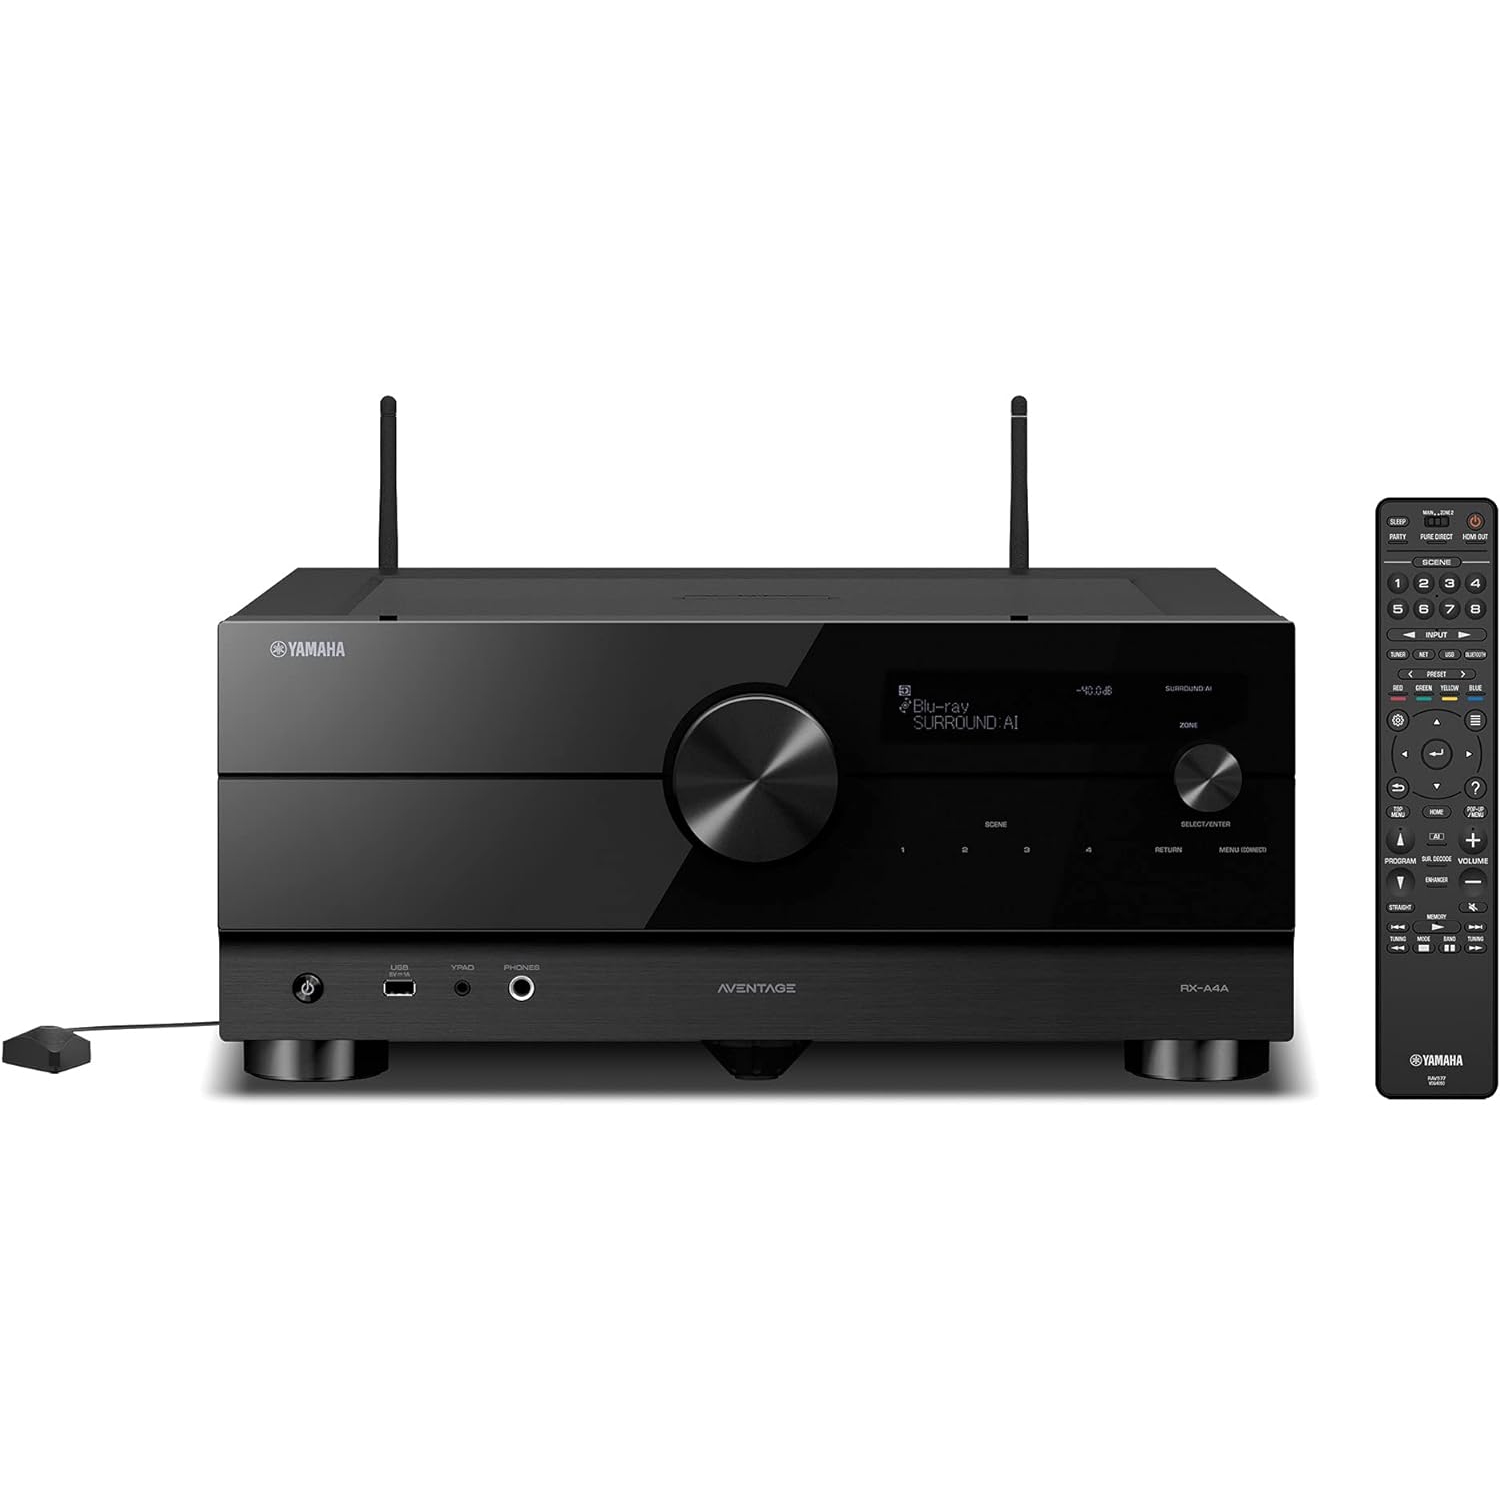 Yamaha Audio RX-A4 AVENTAGE 7.1-Channel AV Receiver with MusicCast, RXA4A B, Black